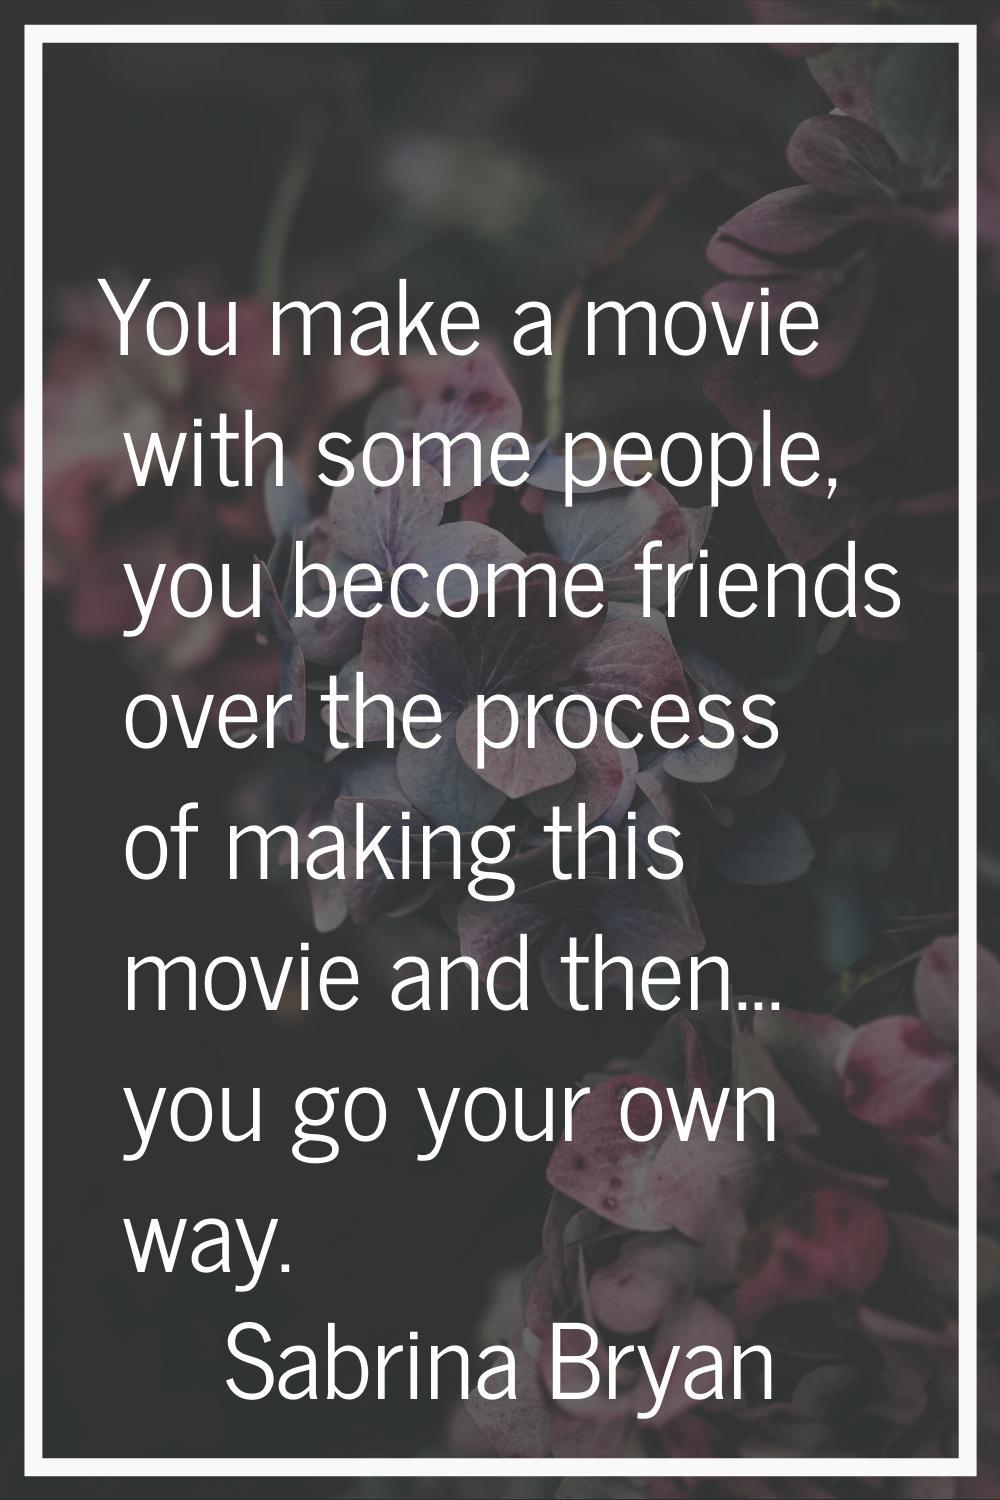 You make a movie with some people, you become friends over the process of making this movie and the